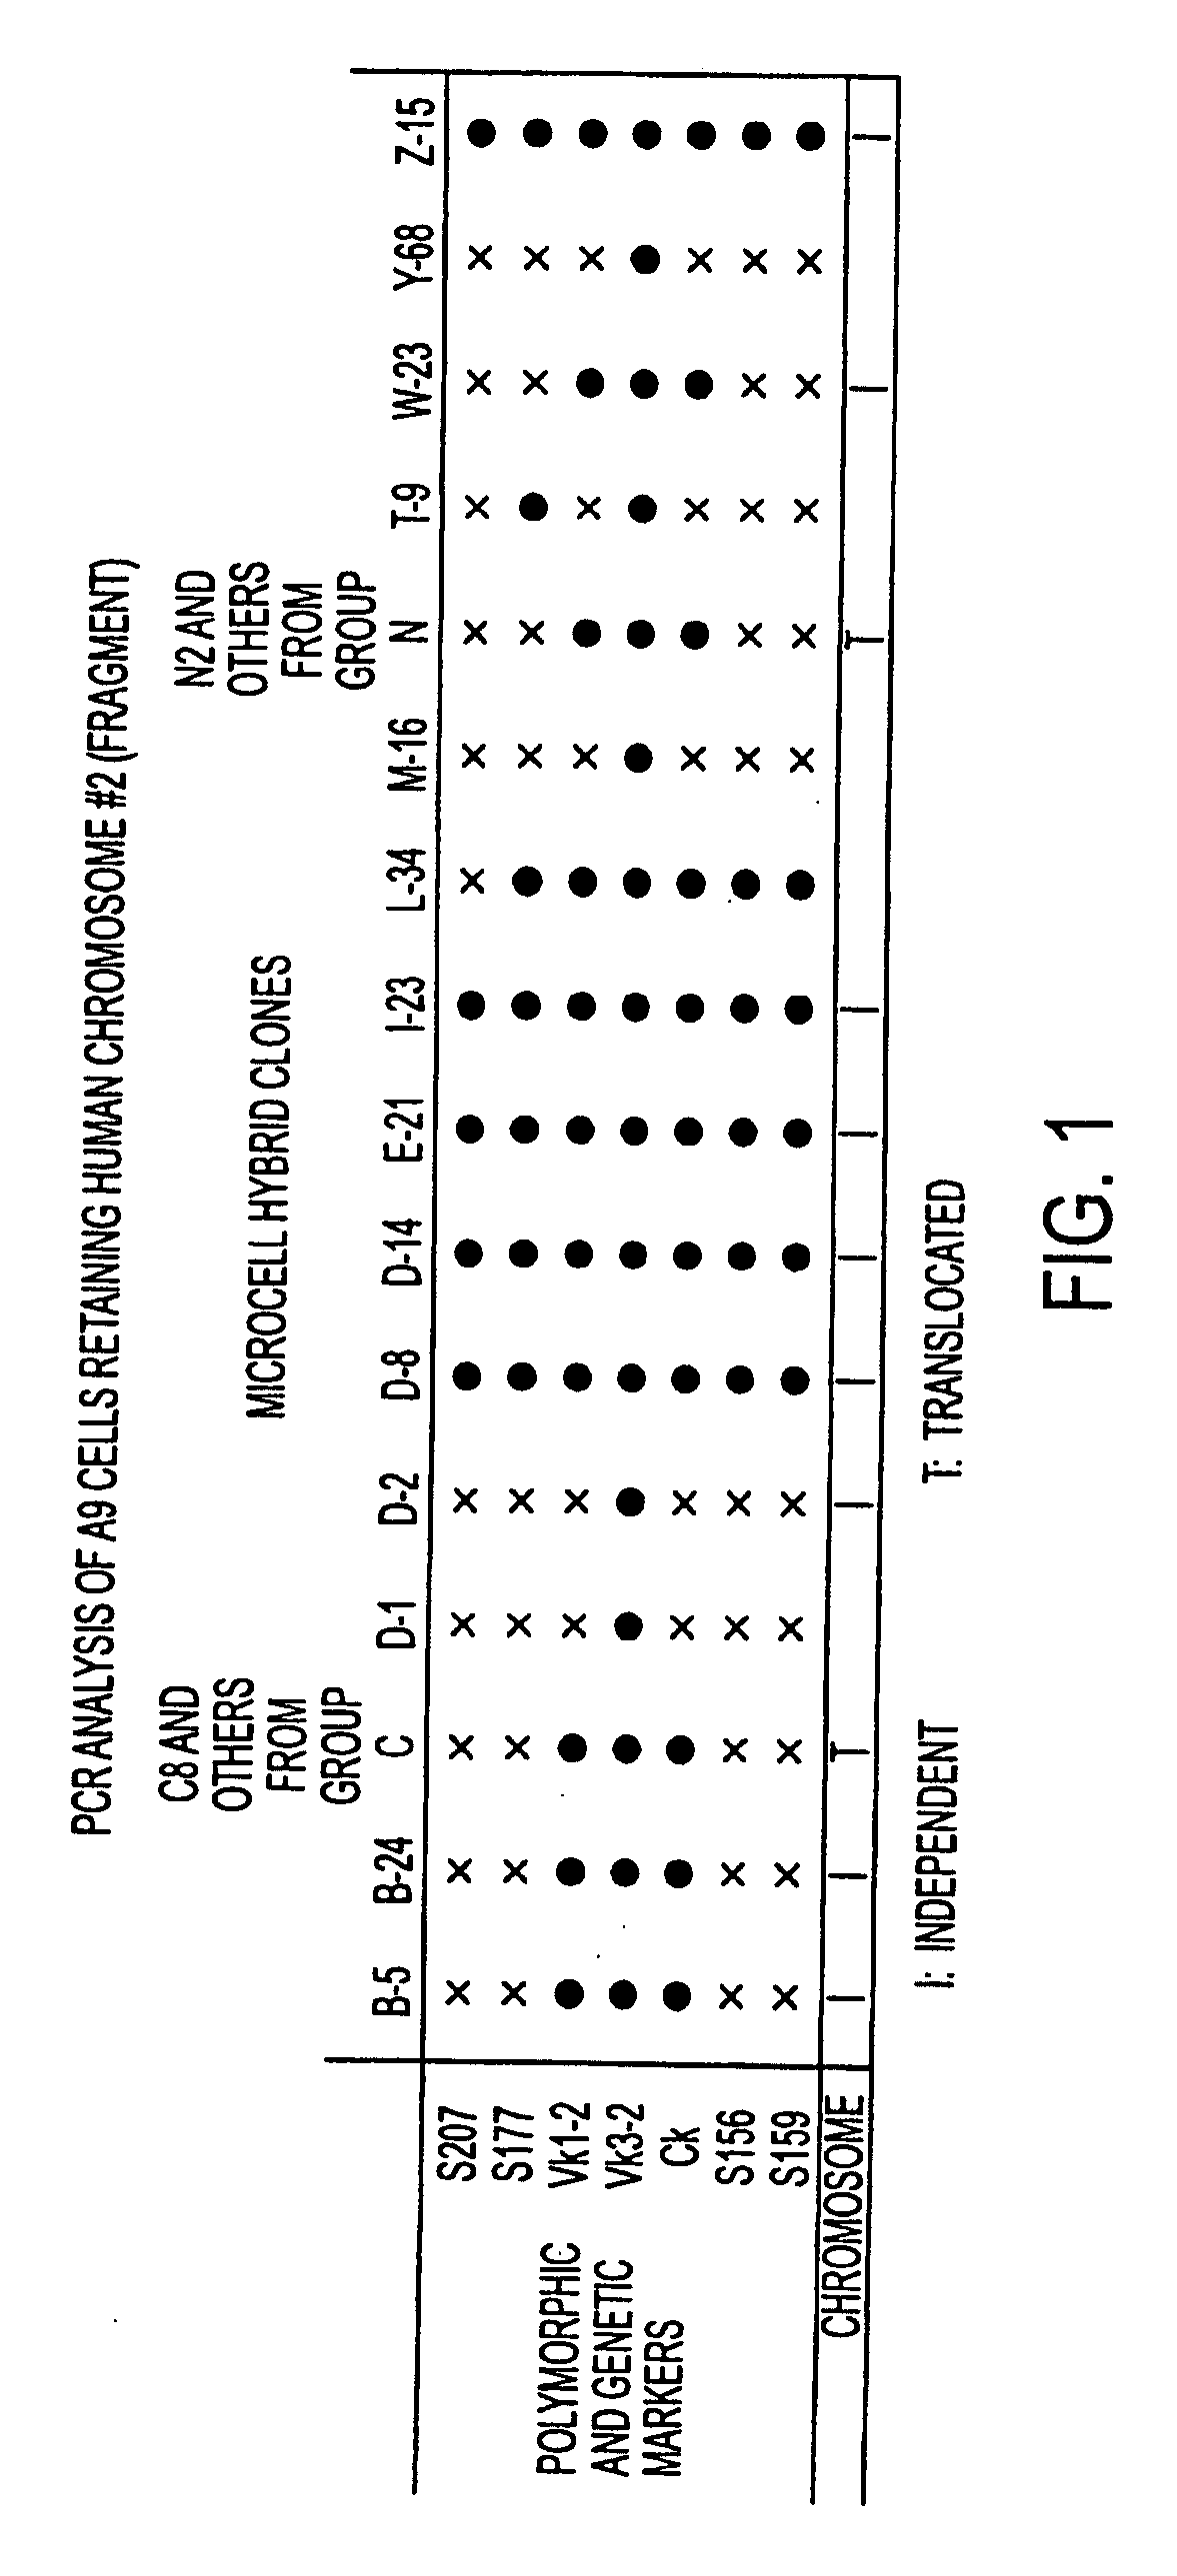 Isolation of a rearranged human immunoglobulin gene from a chimeric mouse and recombinant production of the encoded immunoglobulin